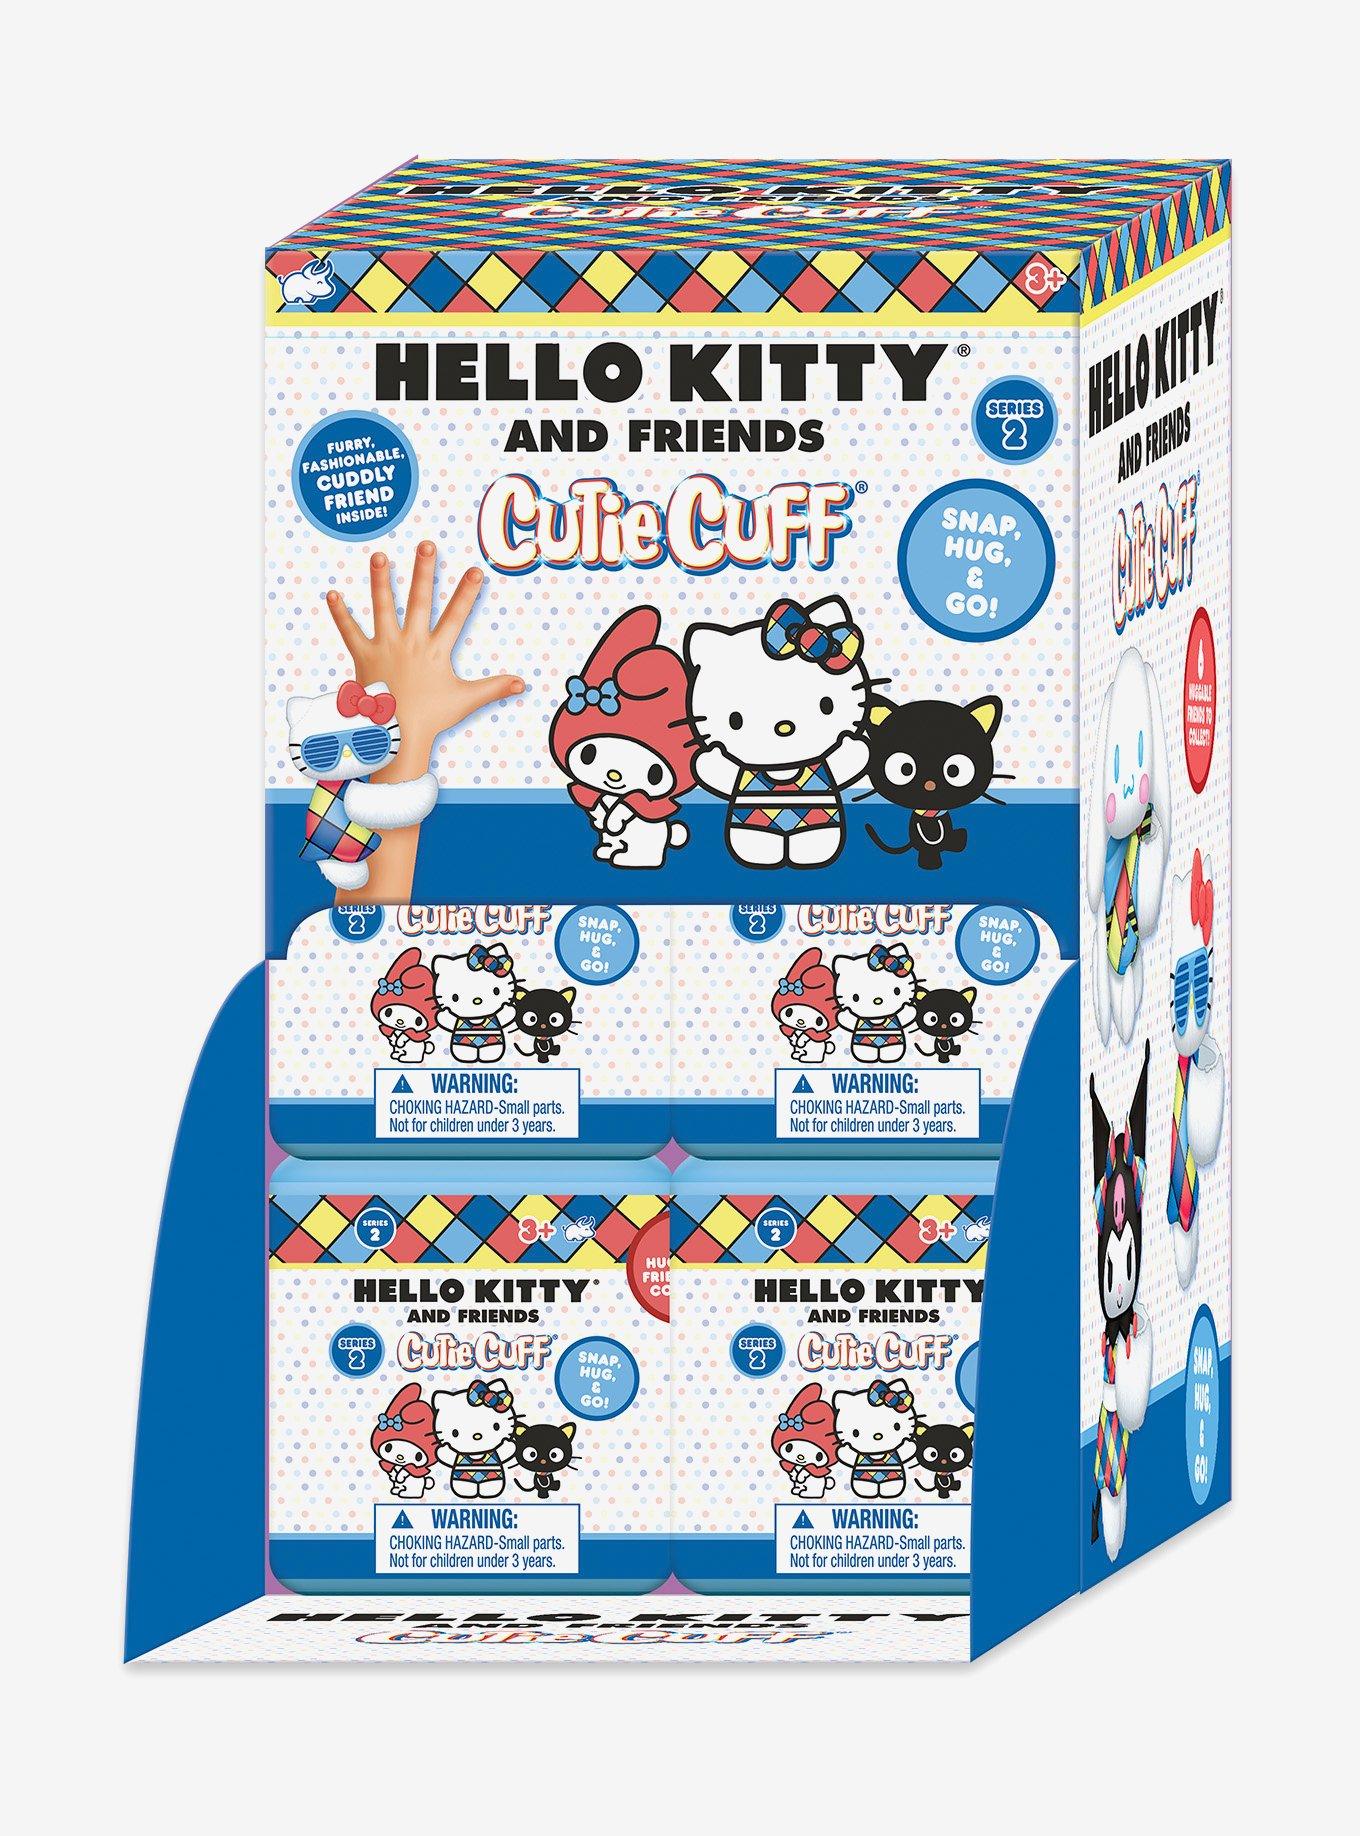 Business Report: Blue Jays and Hello Kitty team up